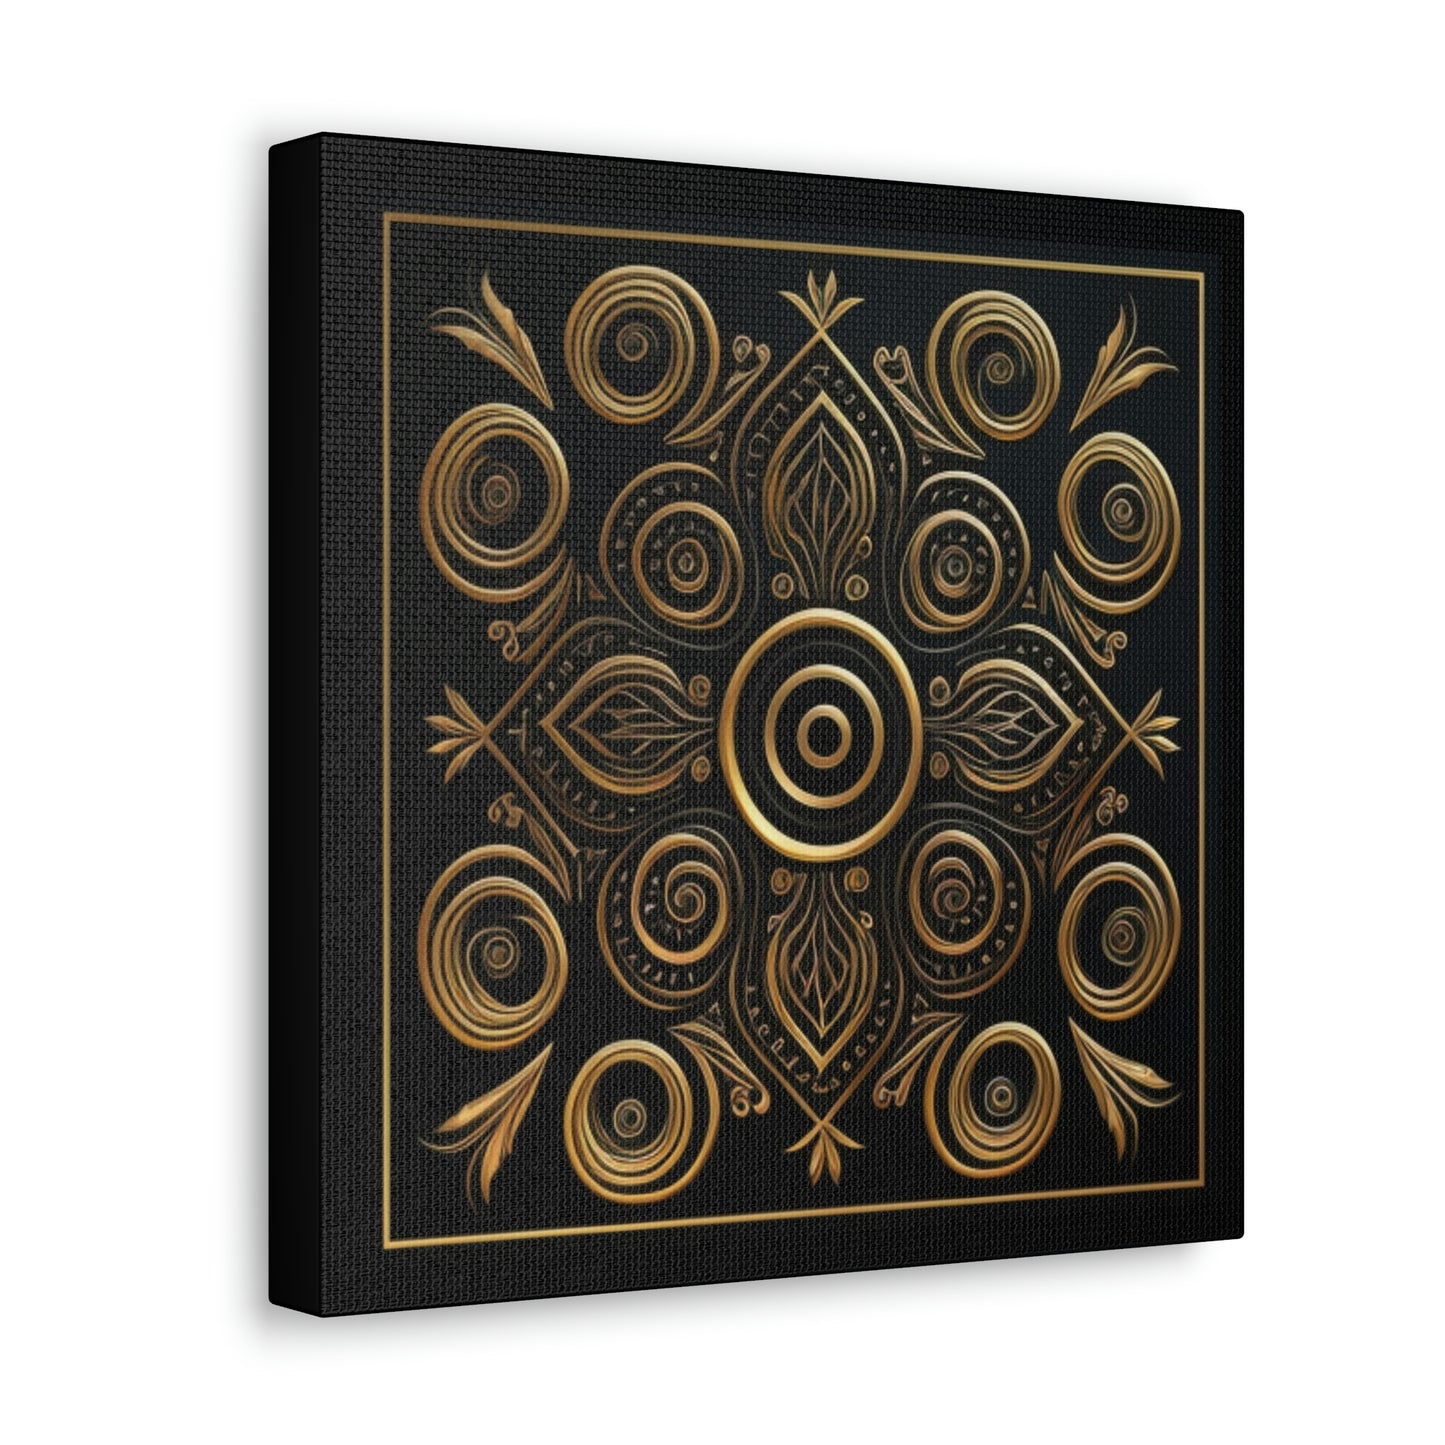 Black and Gold Circles and Diamonds Filigree Canvas Gallery Wrapped Prints